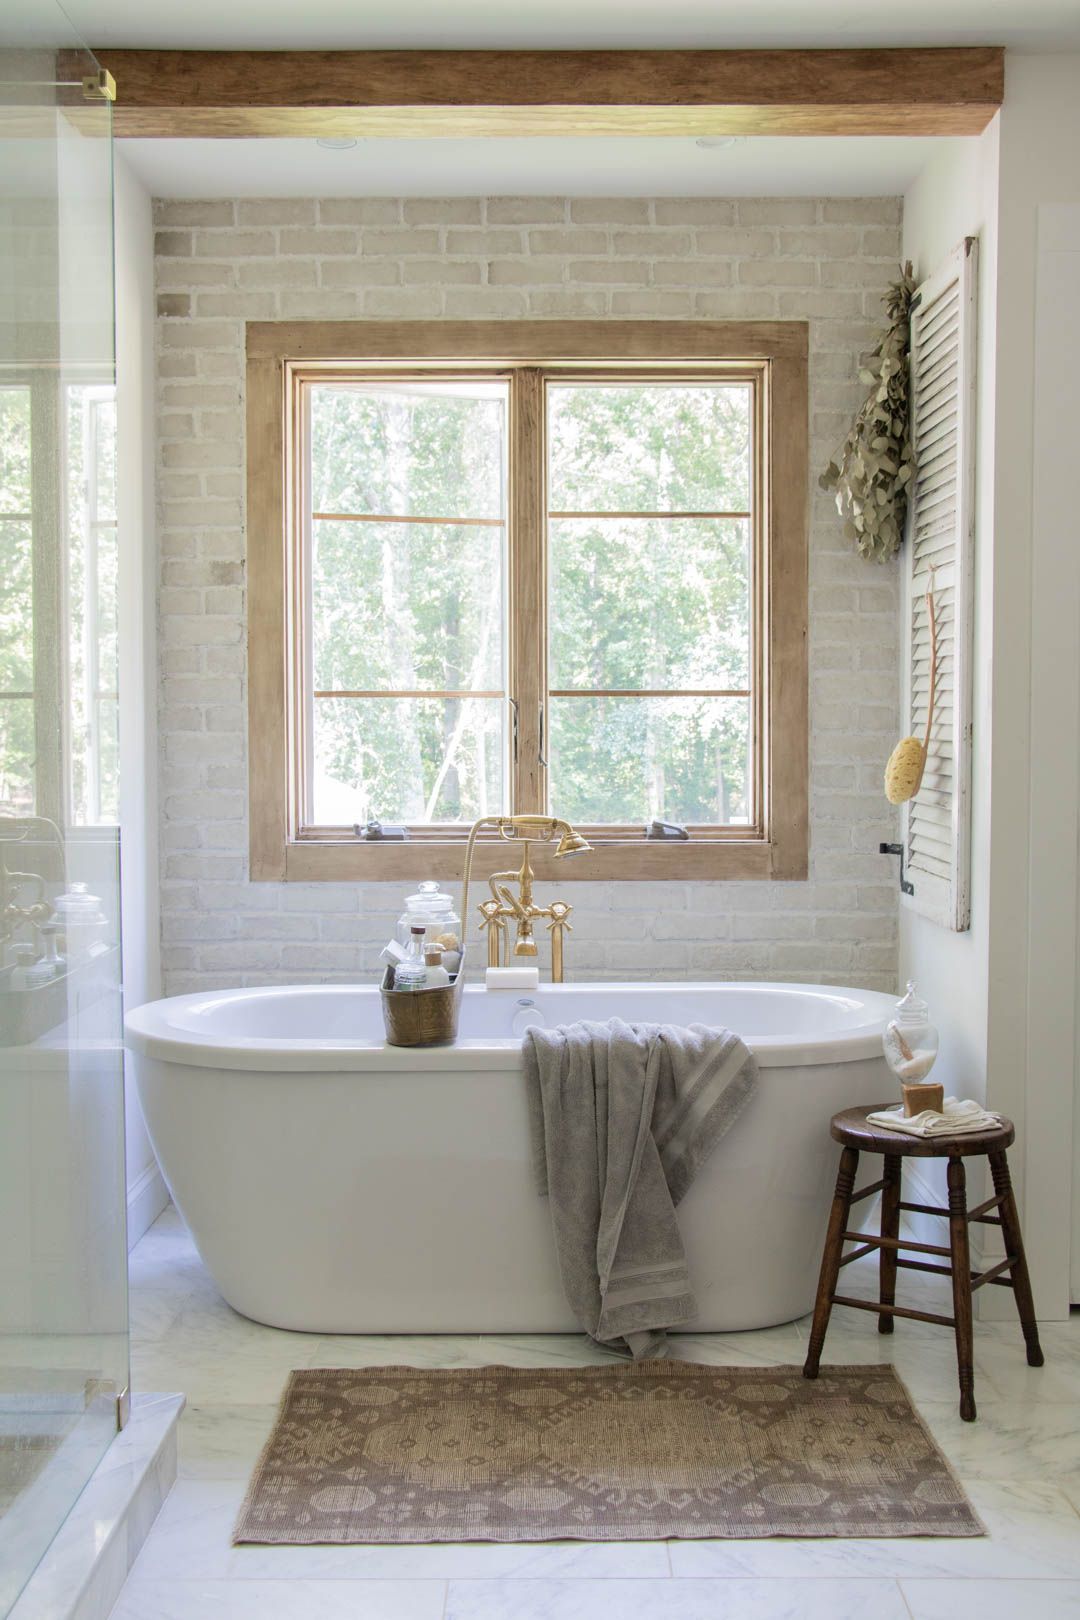 Top Tips You Should Know for Shopping  Bathtubs